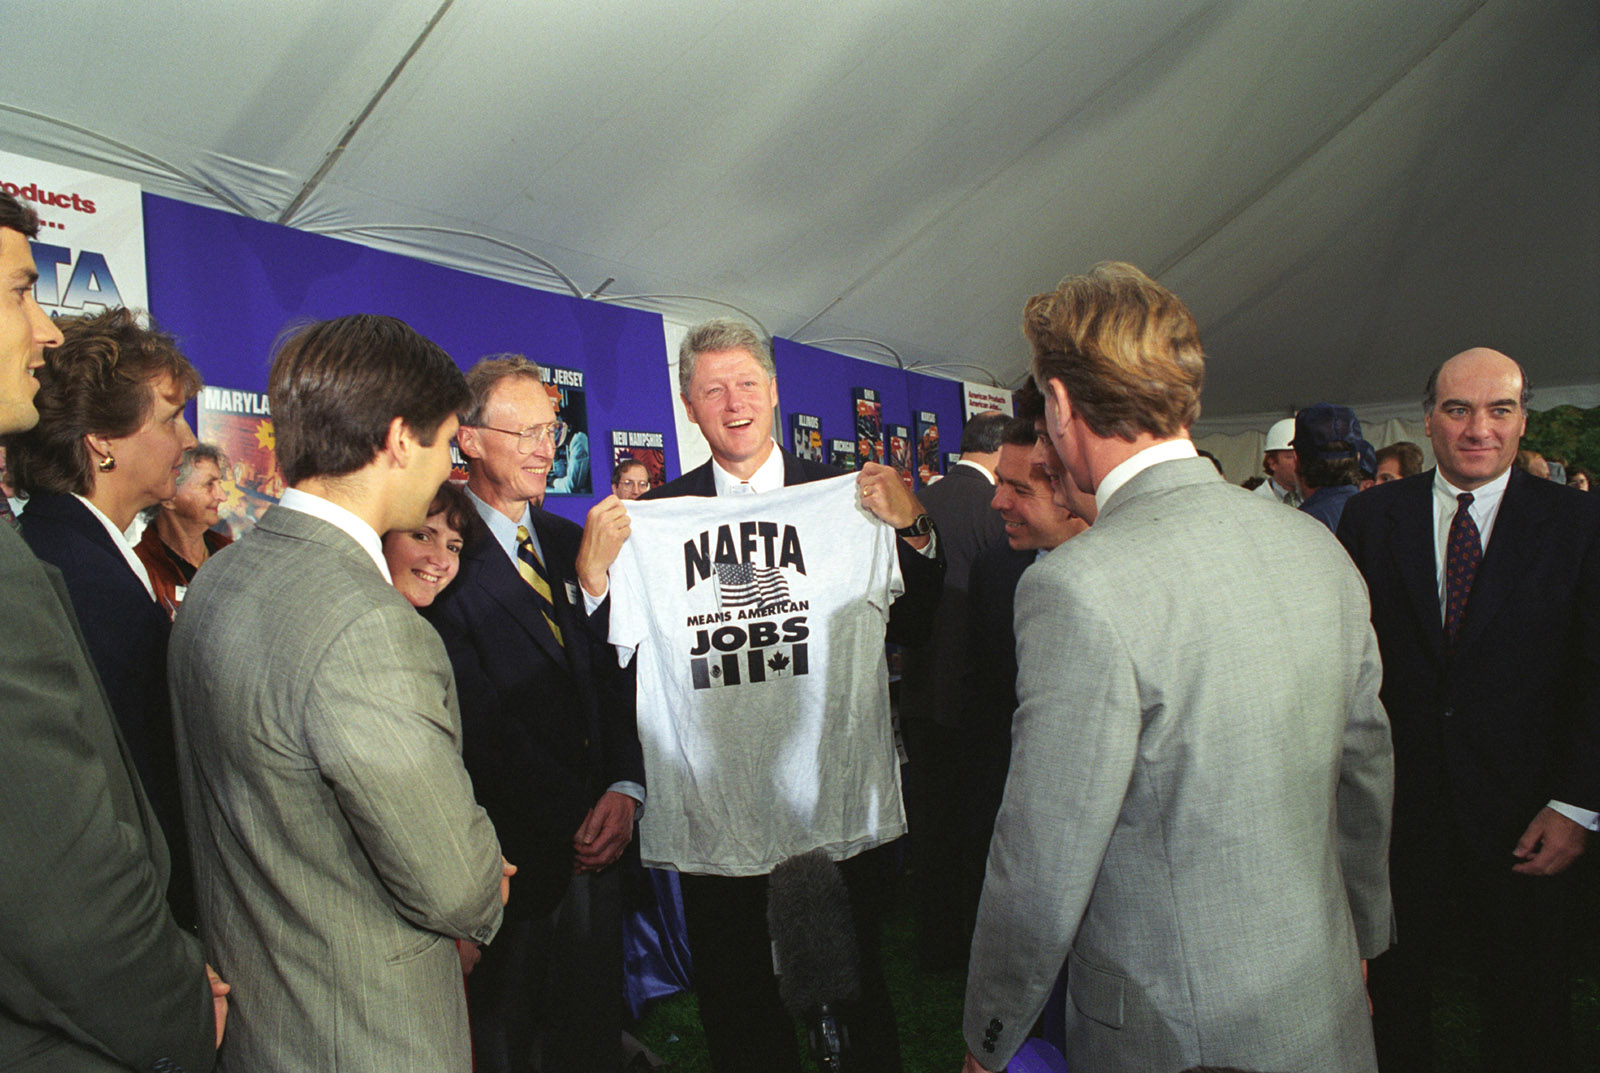 President Bill Clinton at a NAFTA event on the South Lawn of the White House